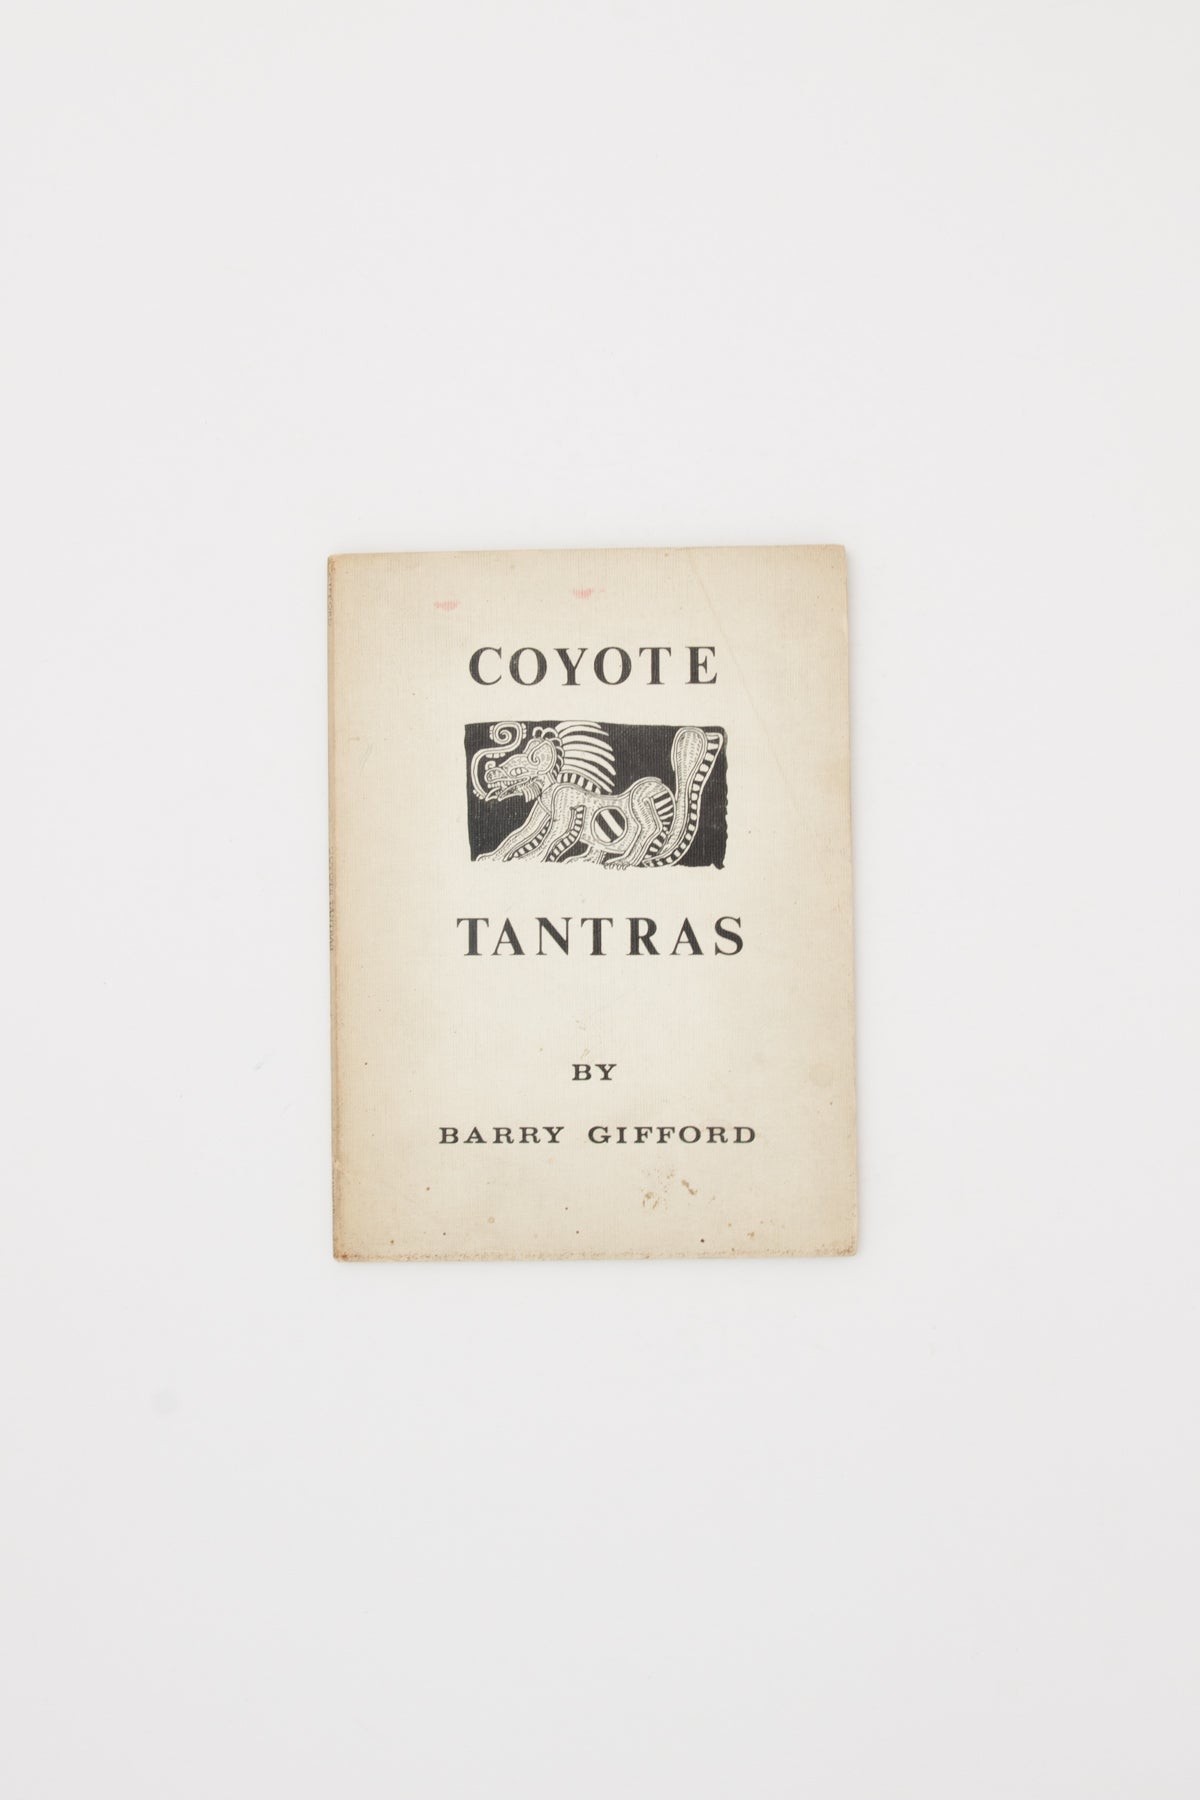 Coyote Tantras - Barry Gifford